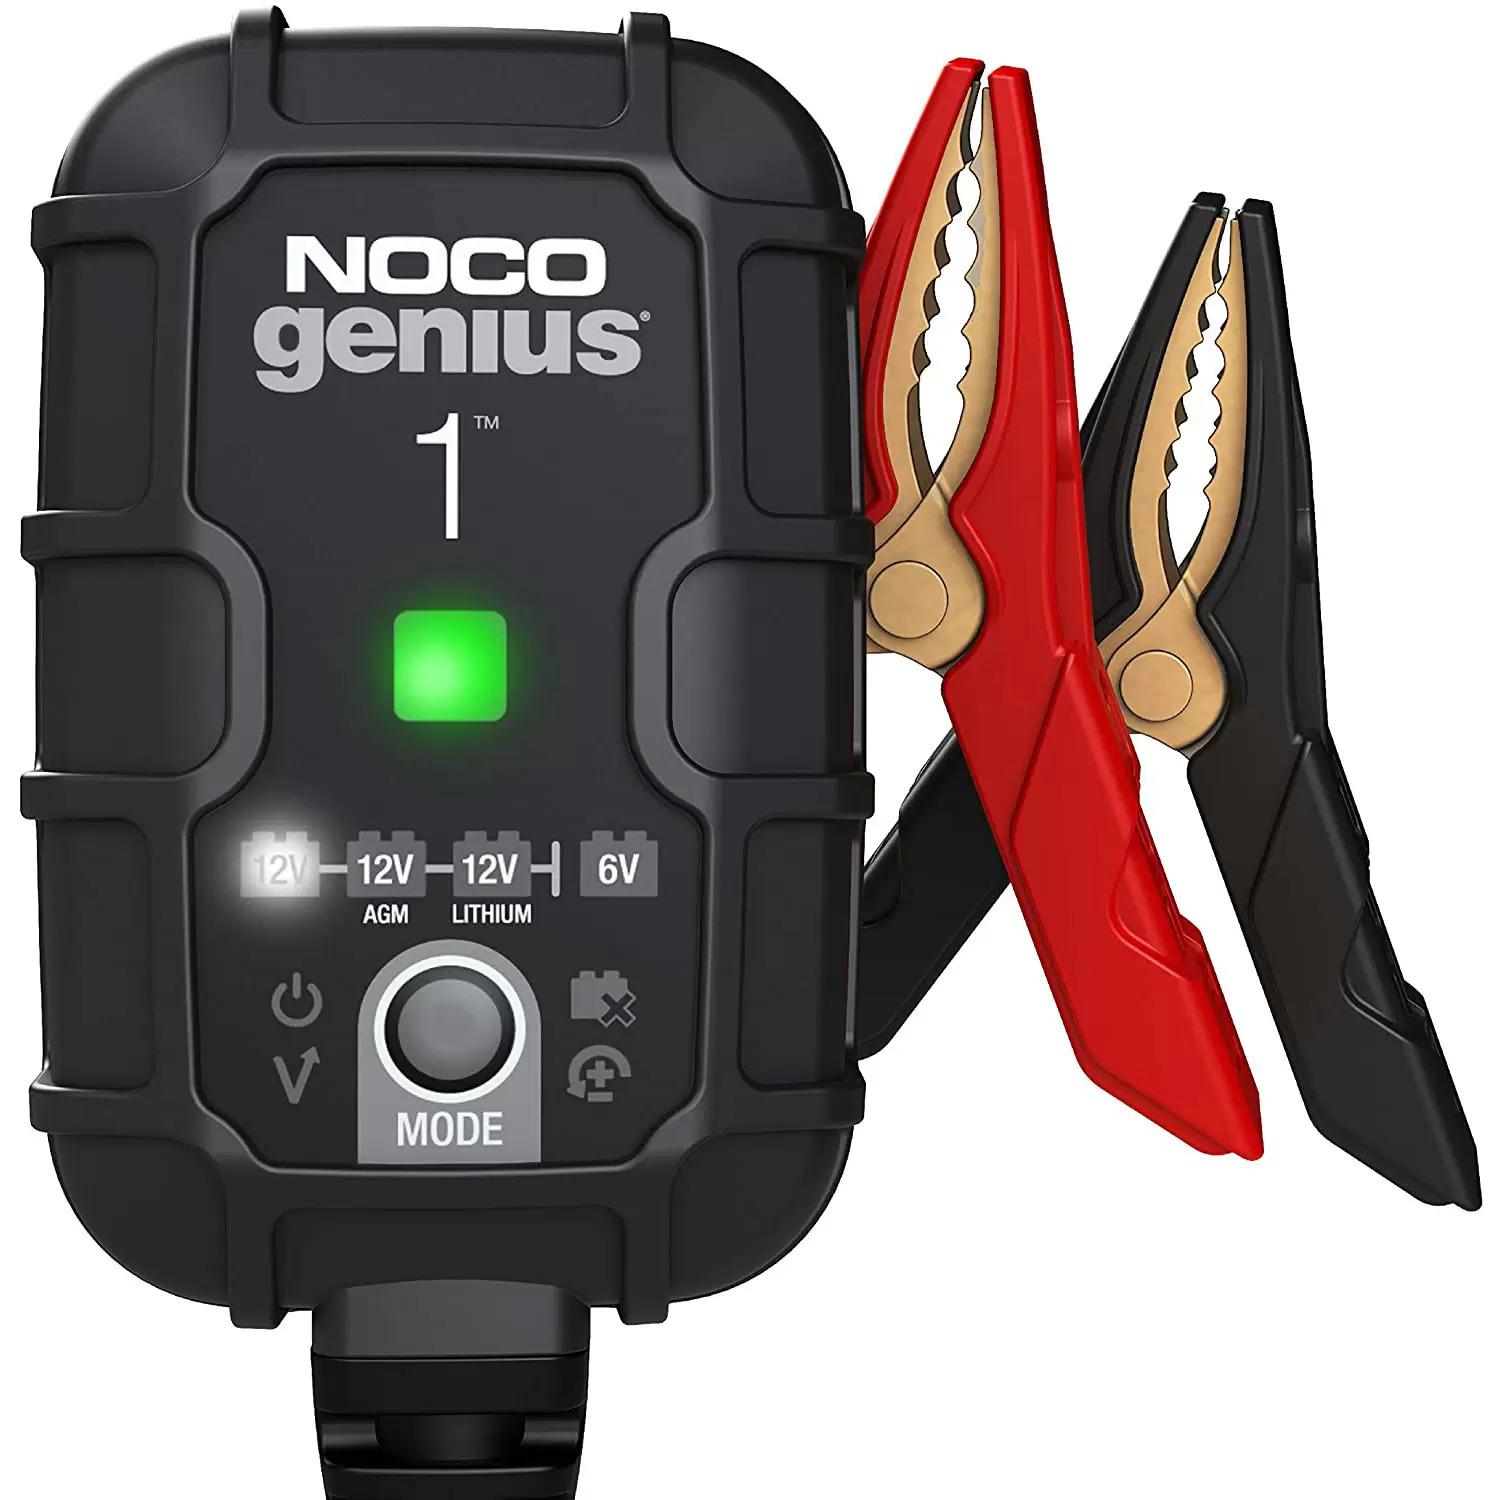 Noco Genius1 1A Fully-Automatic Car Battery Smart Charger for $23.96